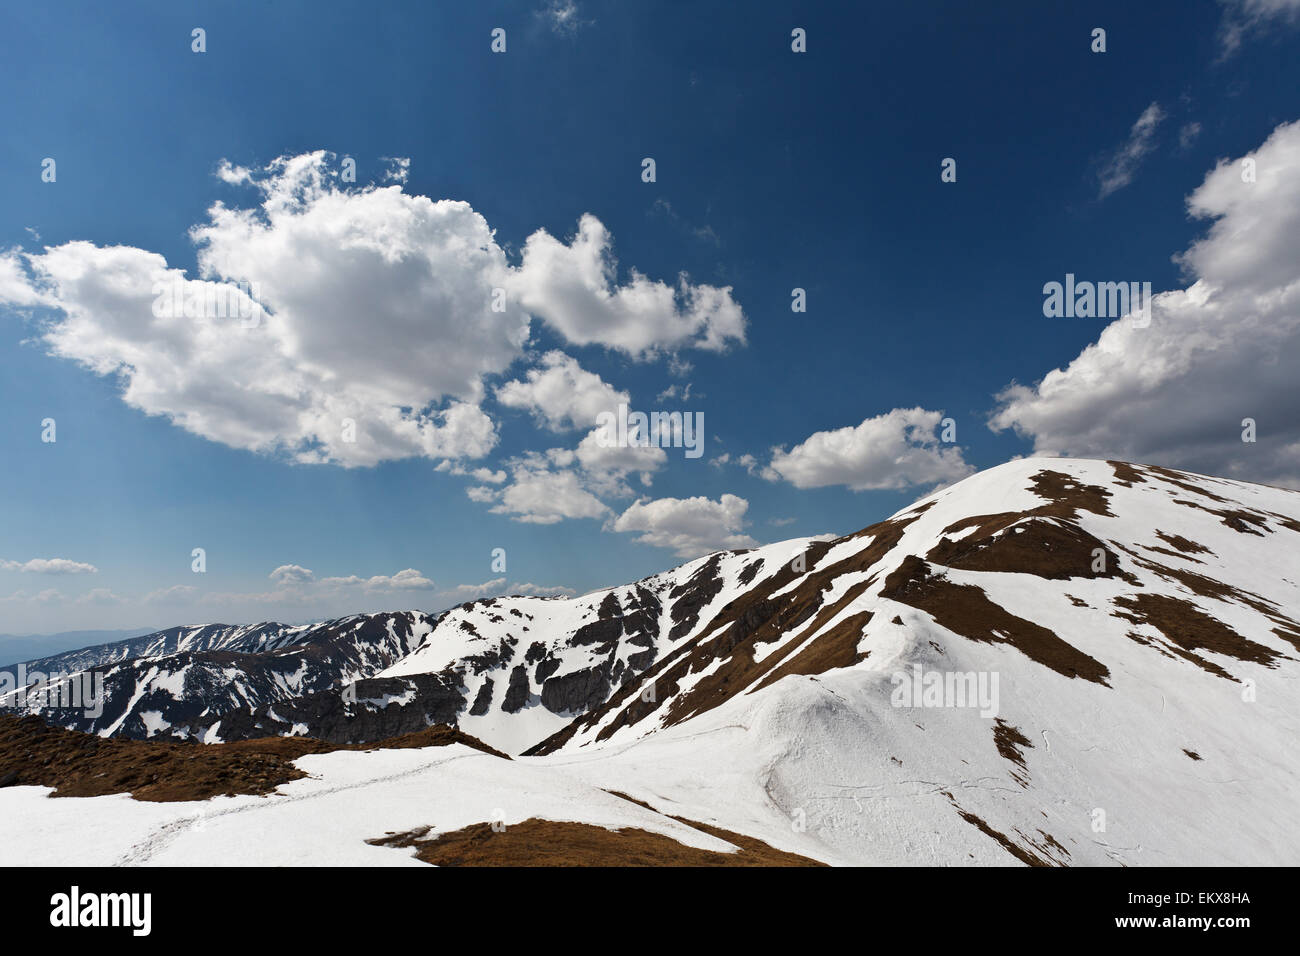 Sun and blue cloudy sky over spring Tatry mountains, covered with remnants of snow Stock Photo